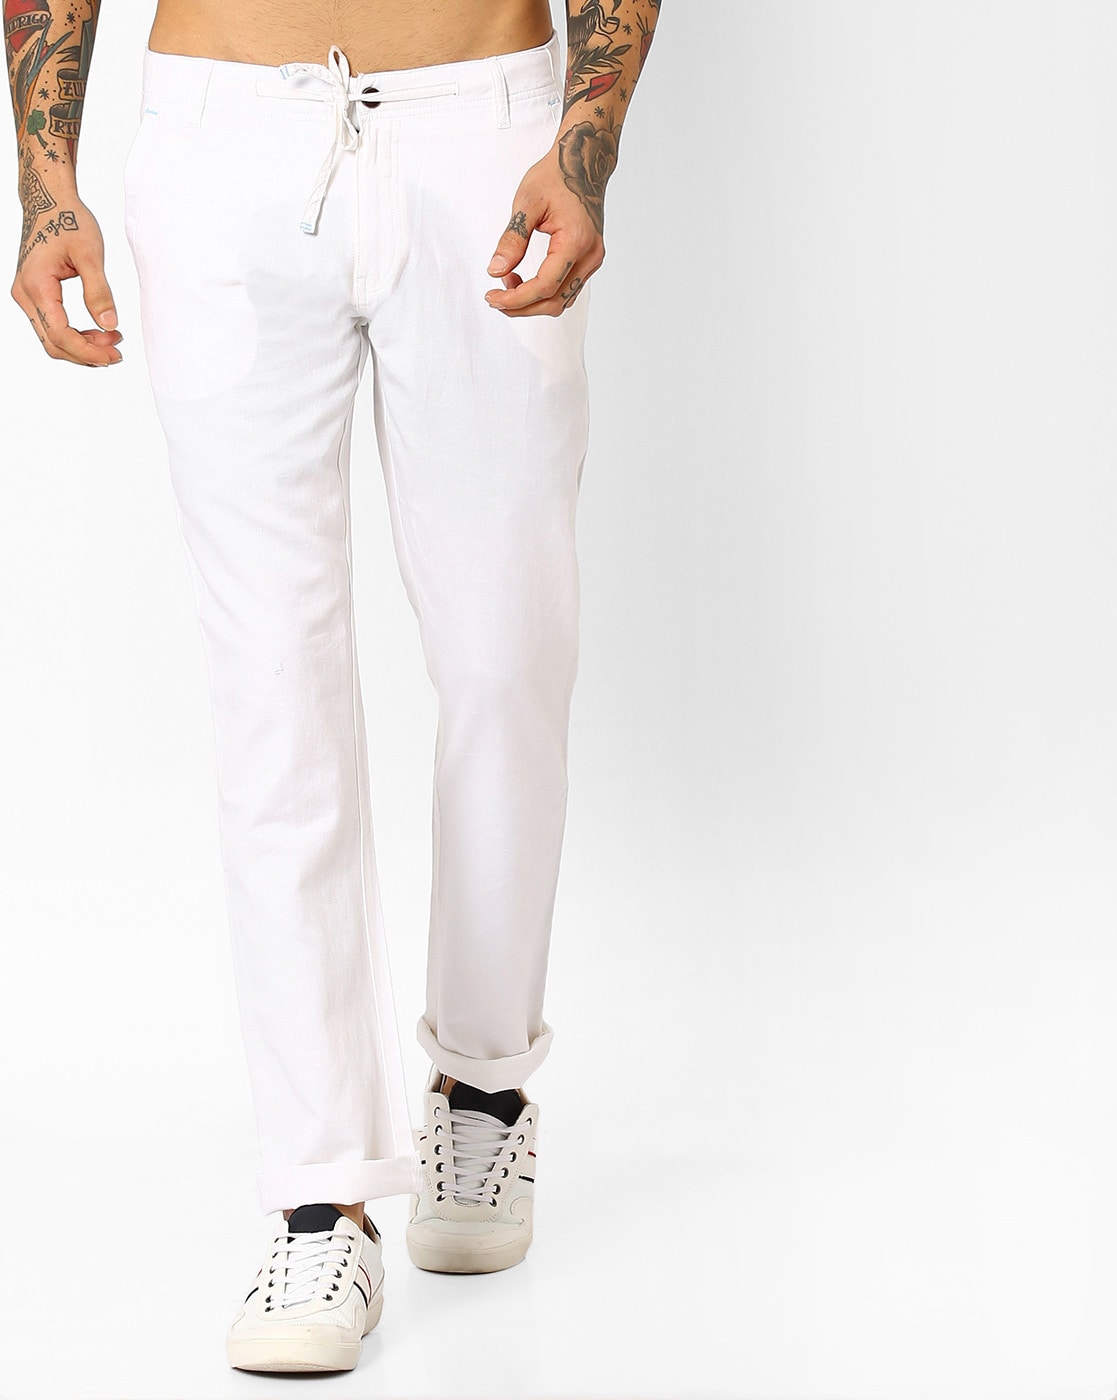 Details 84+ white trousers mens india best - in.coedo.com.vn